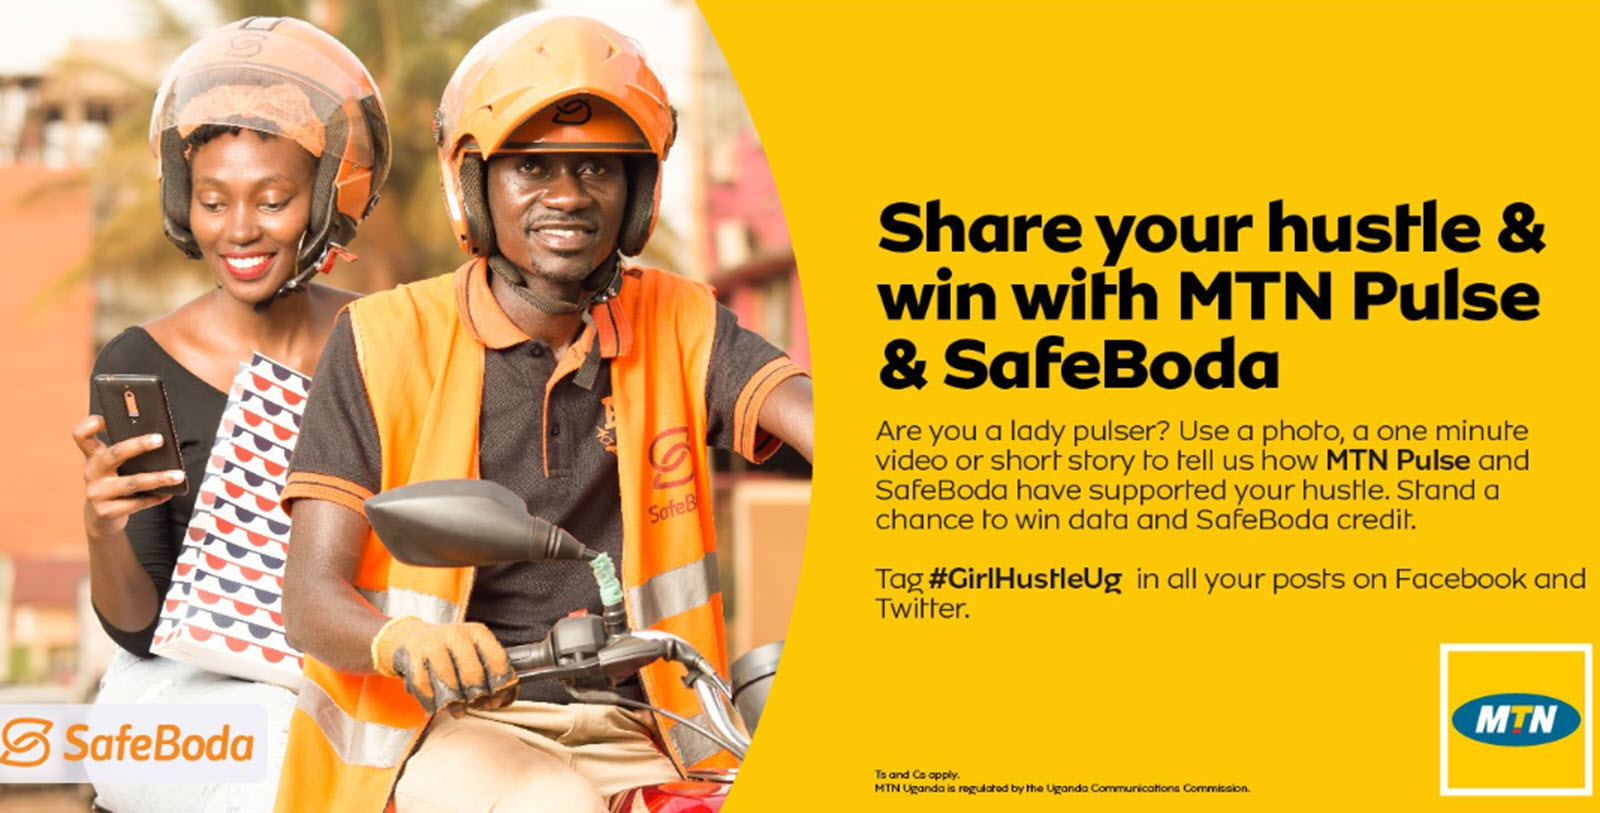 mtn safeboda share your hustle campaign